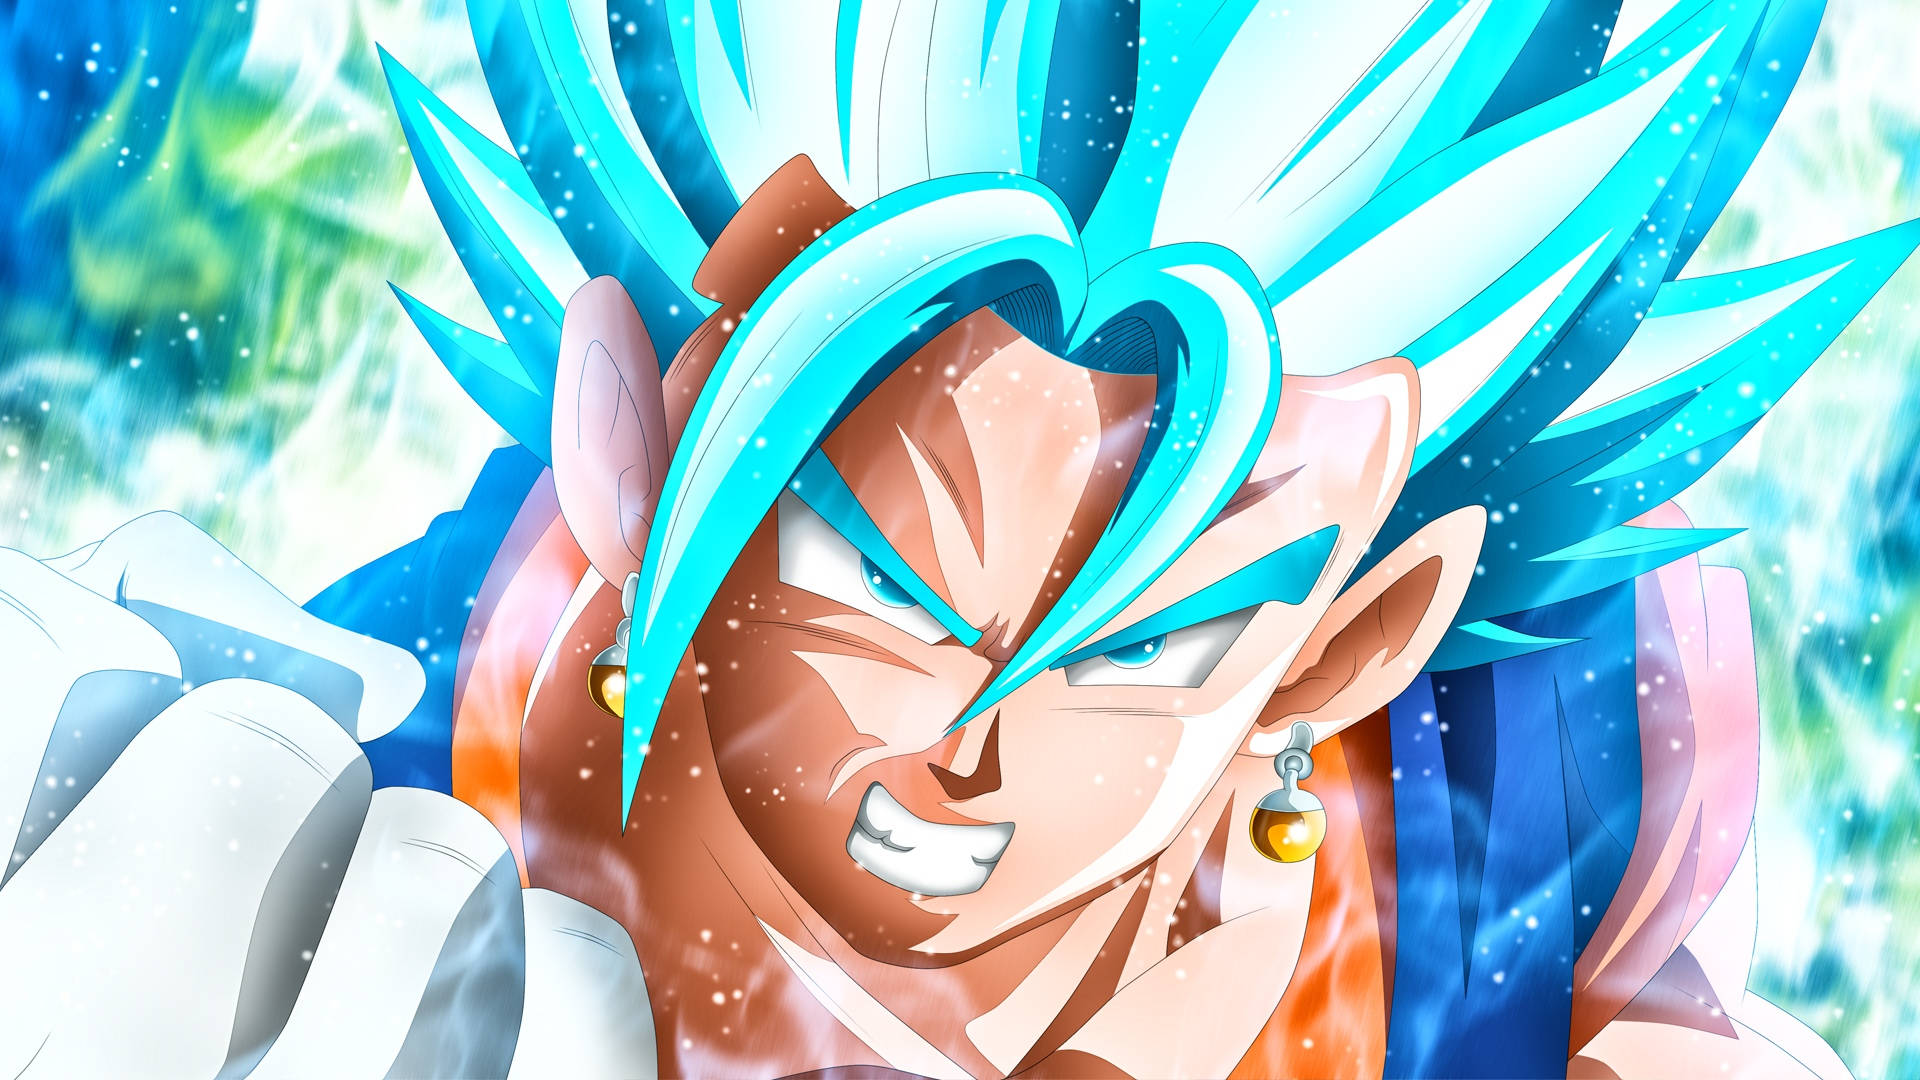 Blue-haired Vegito Clenching His Fist Wallpaper